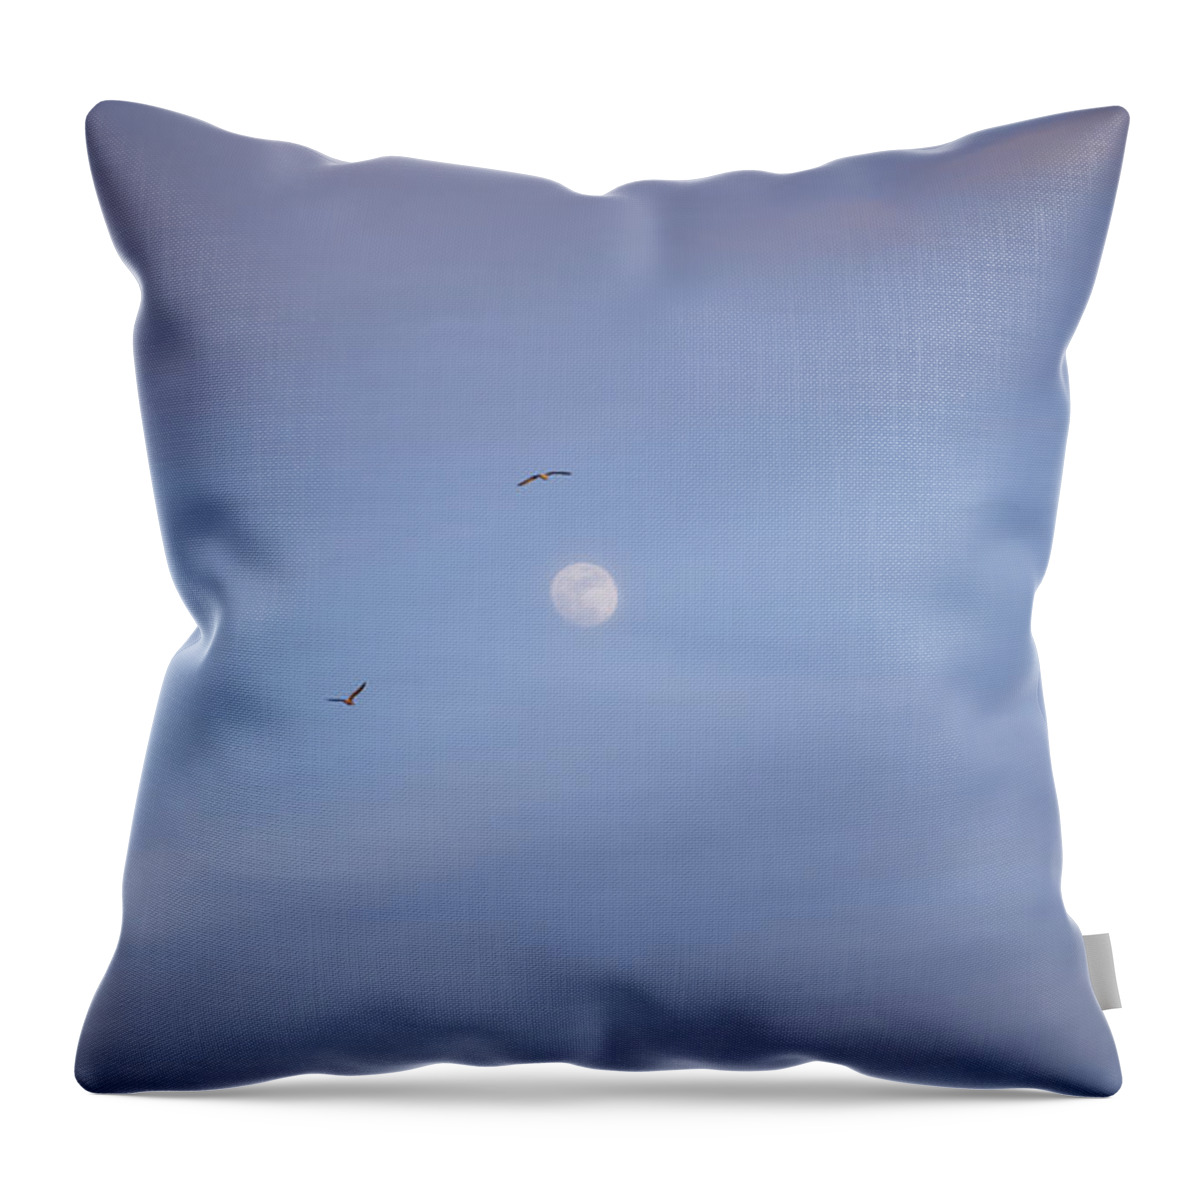 Moon Throw Pillow featuring the photograph Fly me to the moon by Toby McGuire